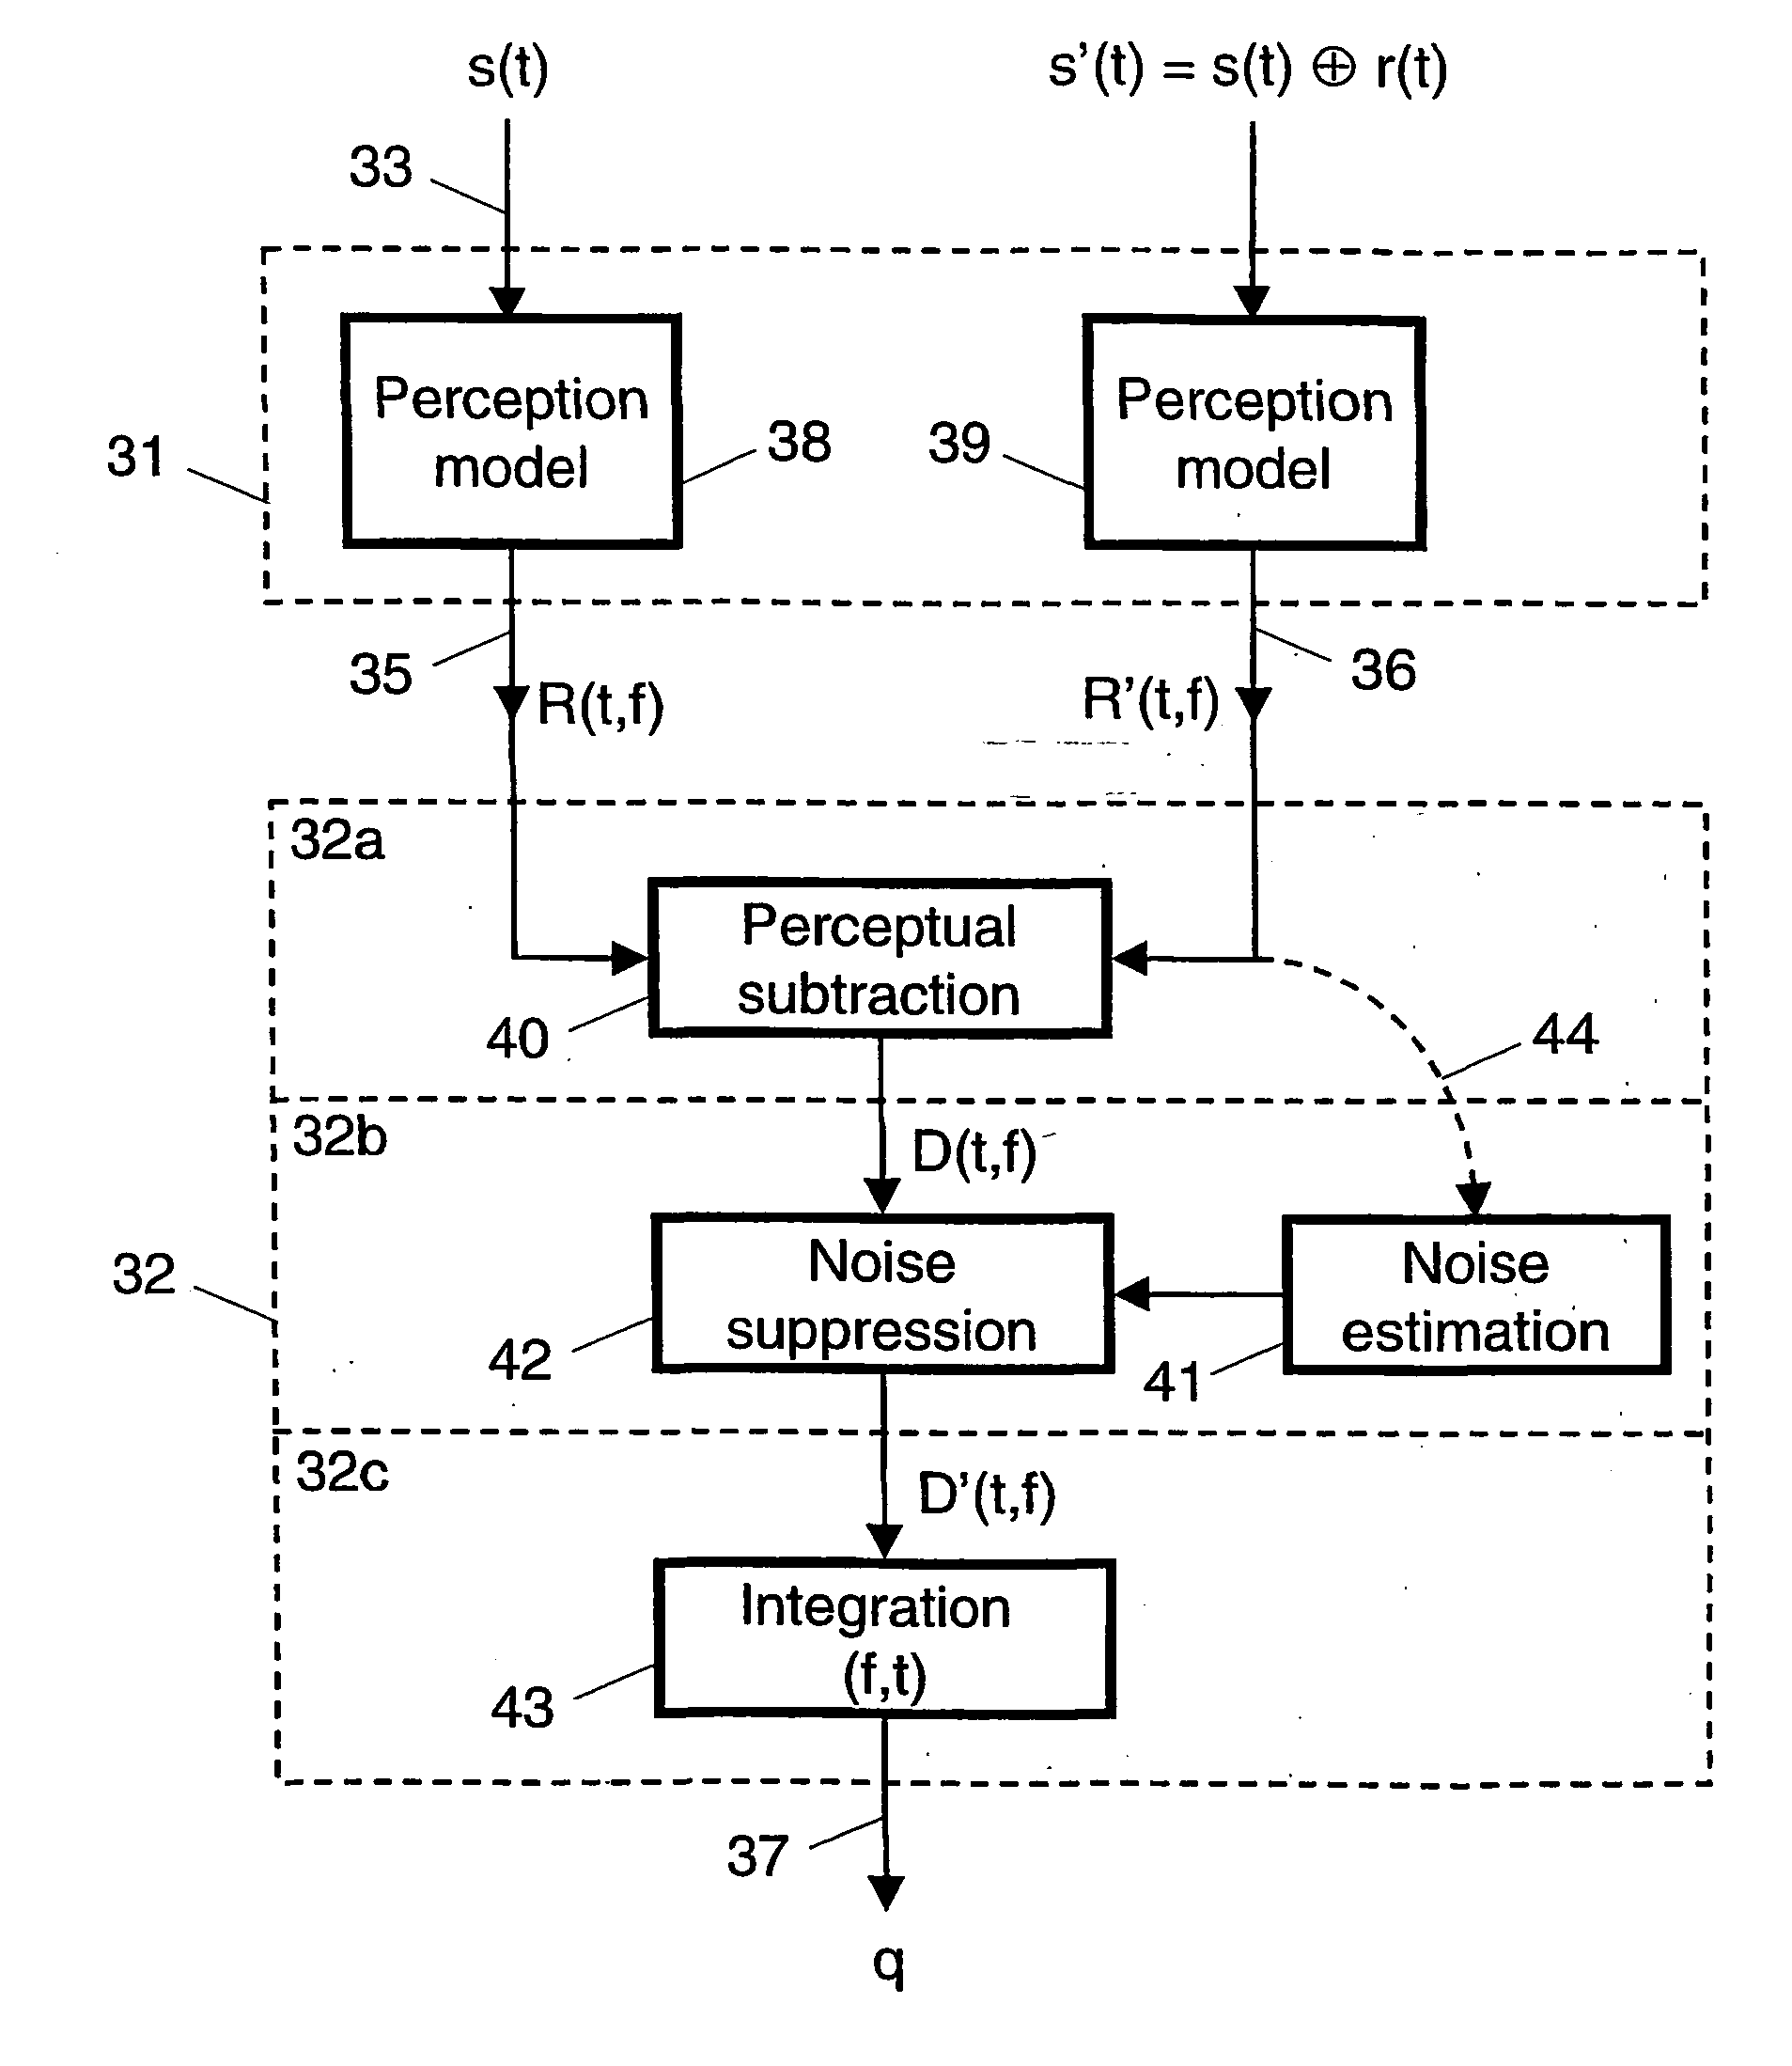 Measuring a talking quality of a telephone link in a telecommunications nework